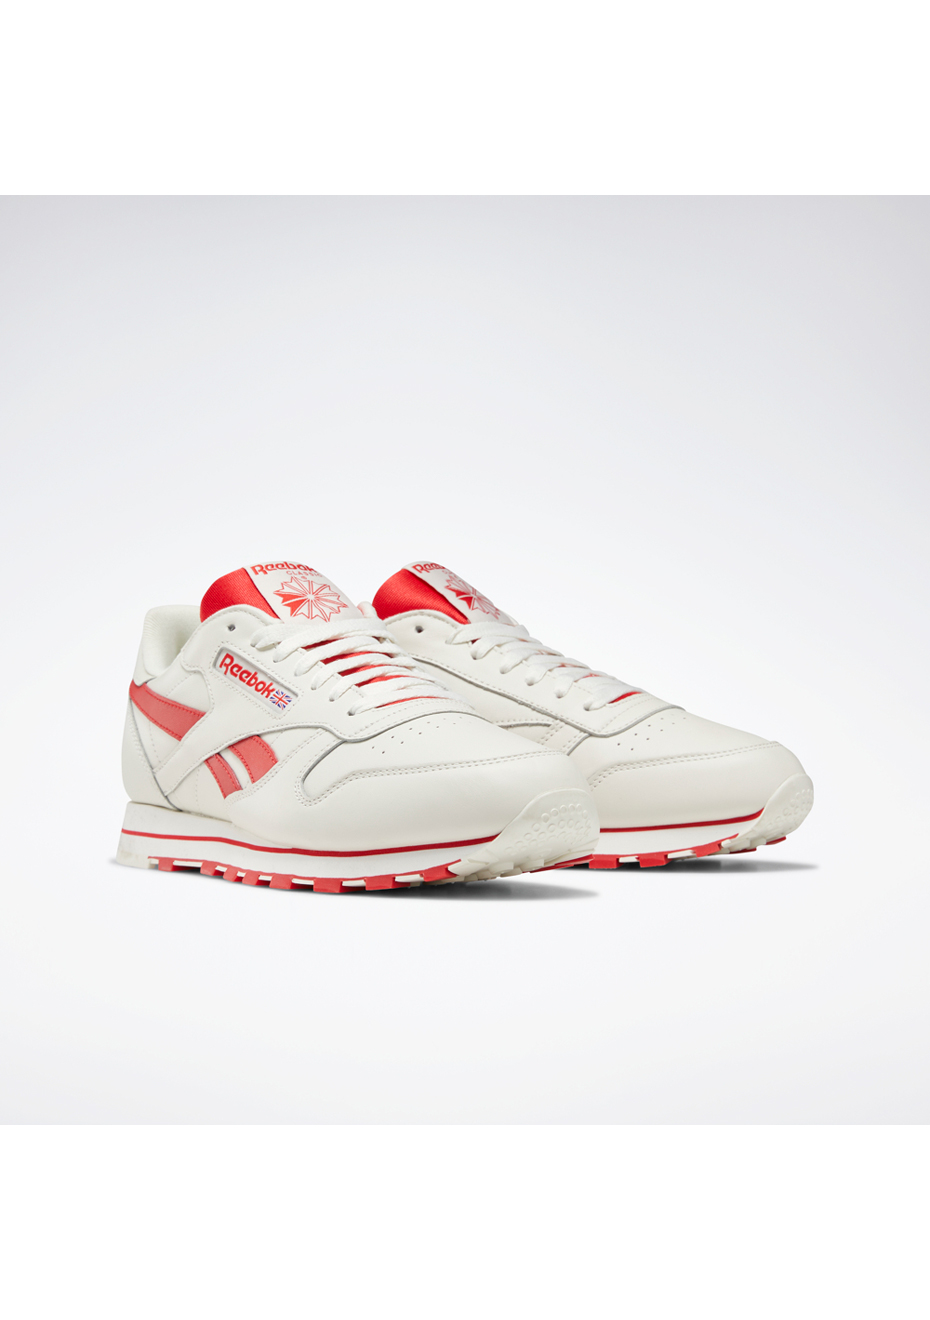 Reebok - Mens Classic Leather Shoes 